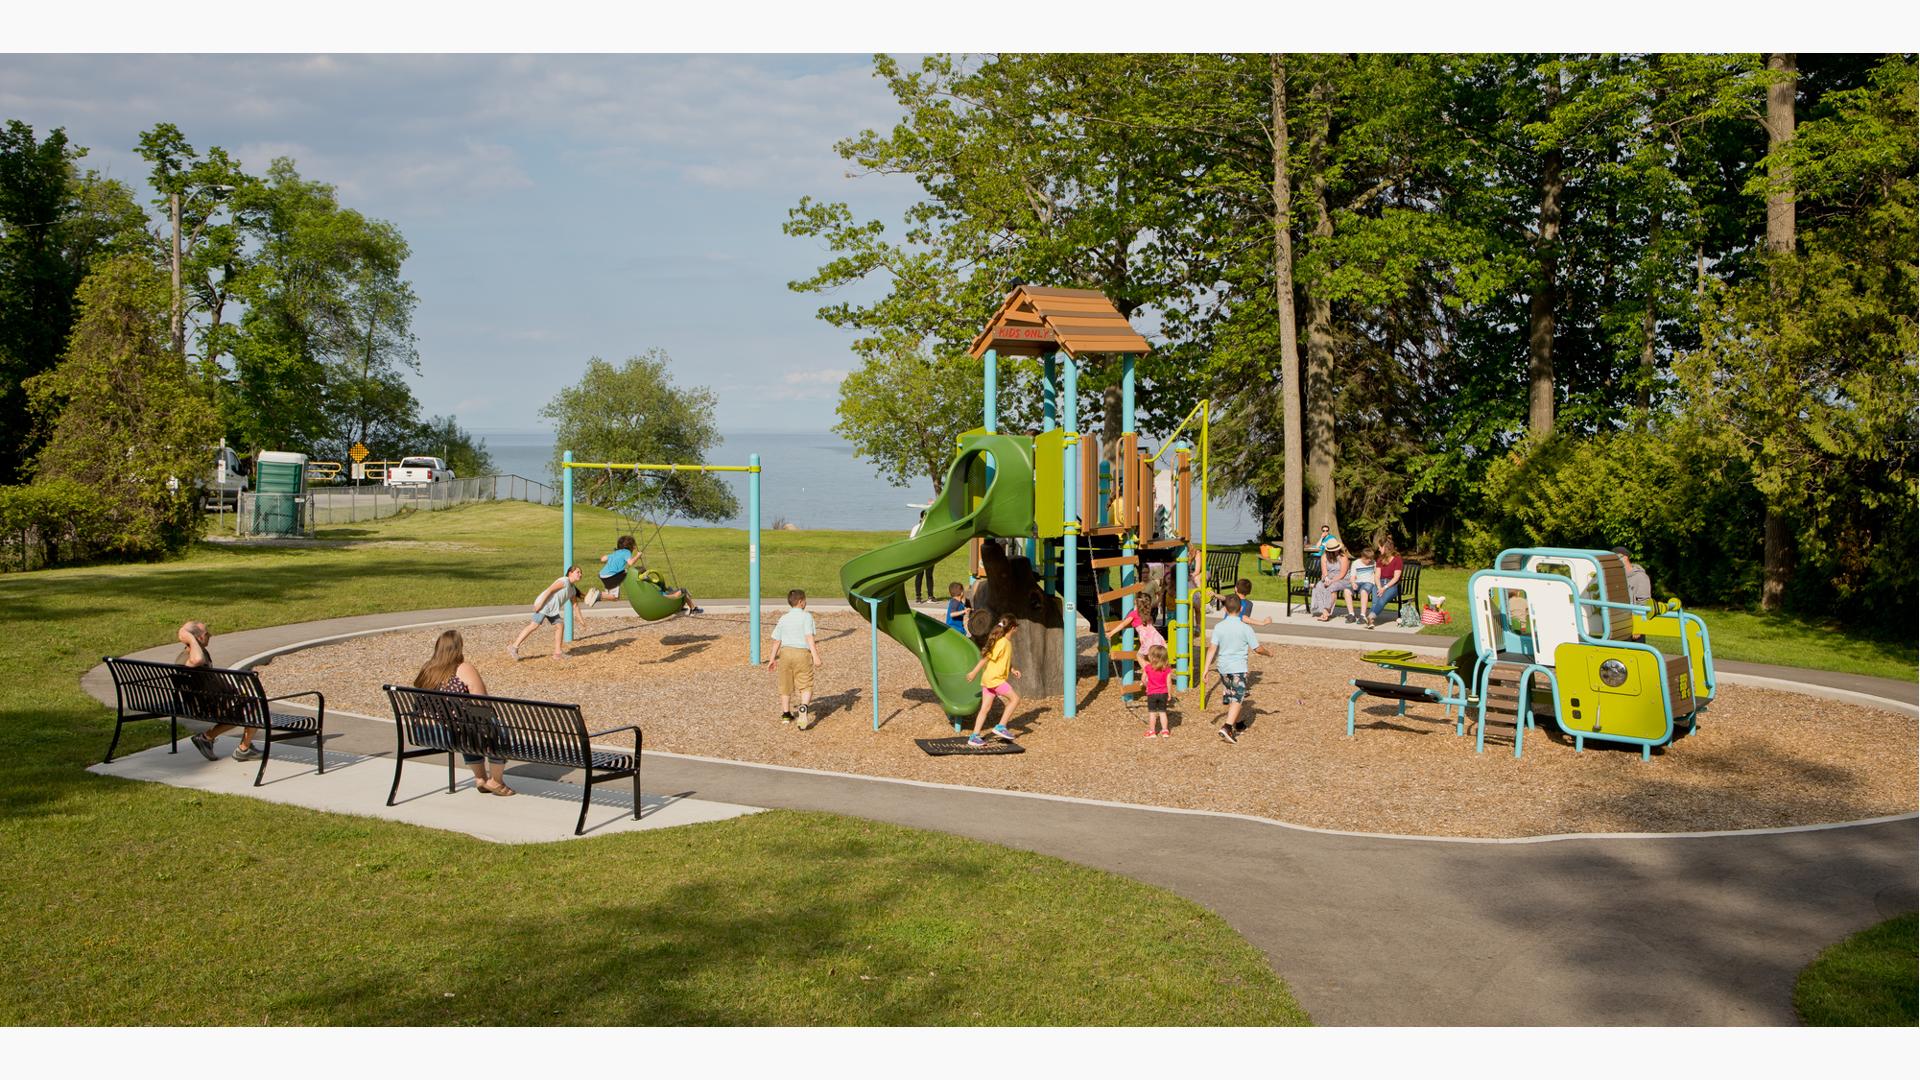 Nature-inspired playground blends into the nearby woods and lake setting of this green and blue playground. Swings located to left of compact playground with woodgrain roof and modern playstructure for toddlers.